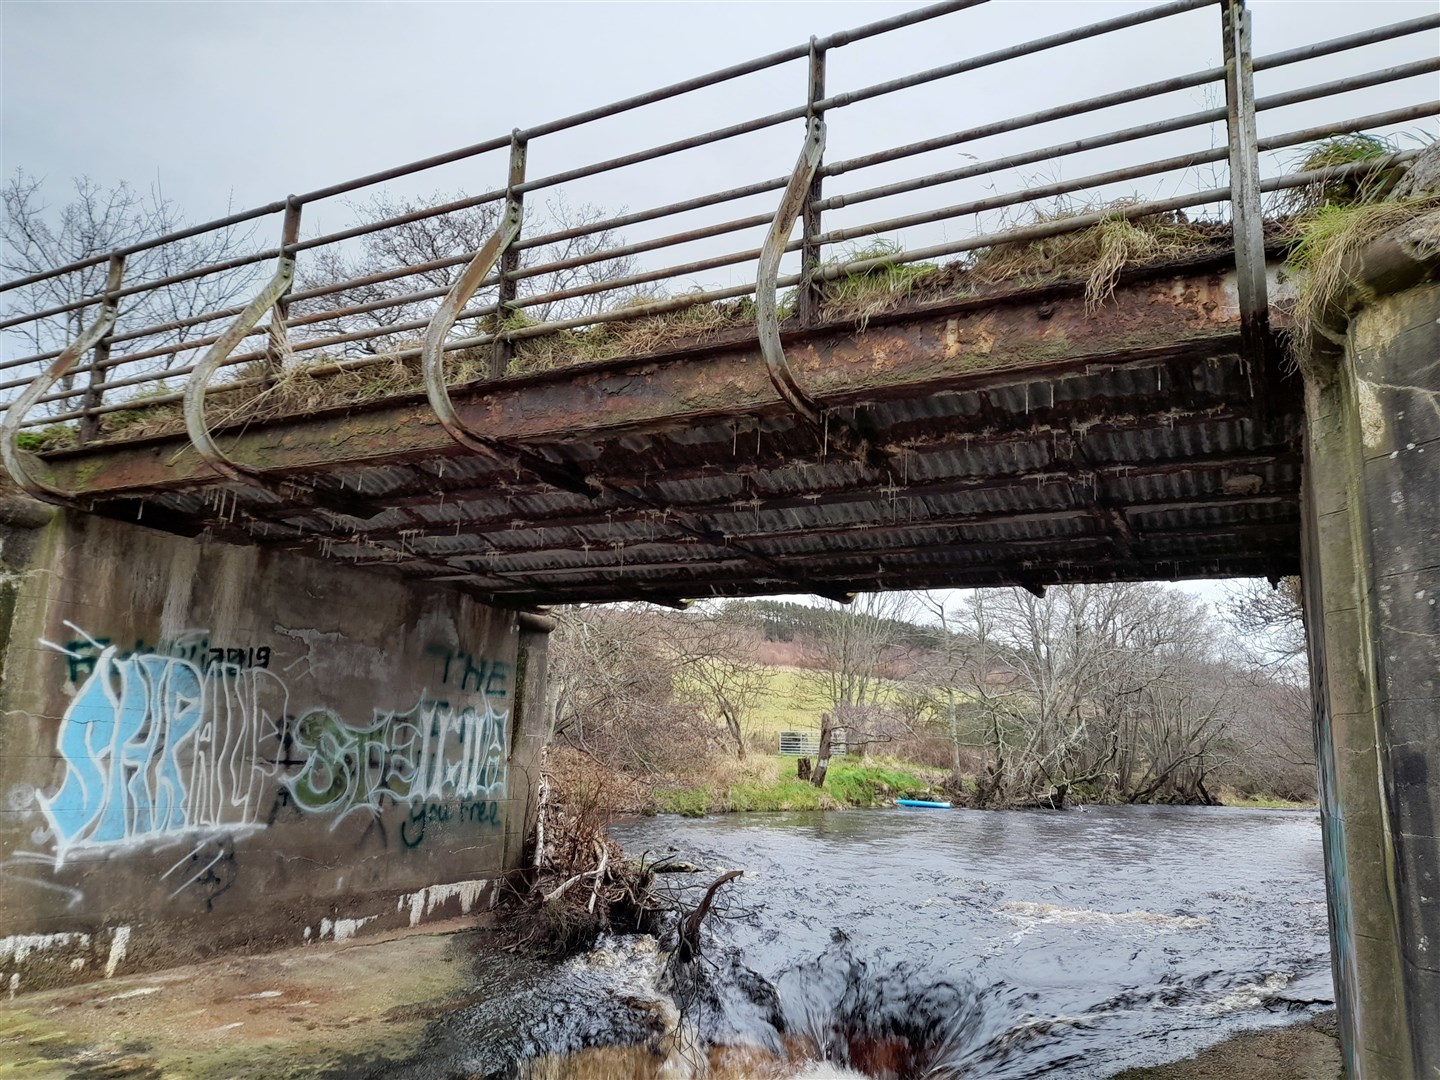 The Cloddach Bridge will close on public safety grounds.